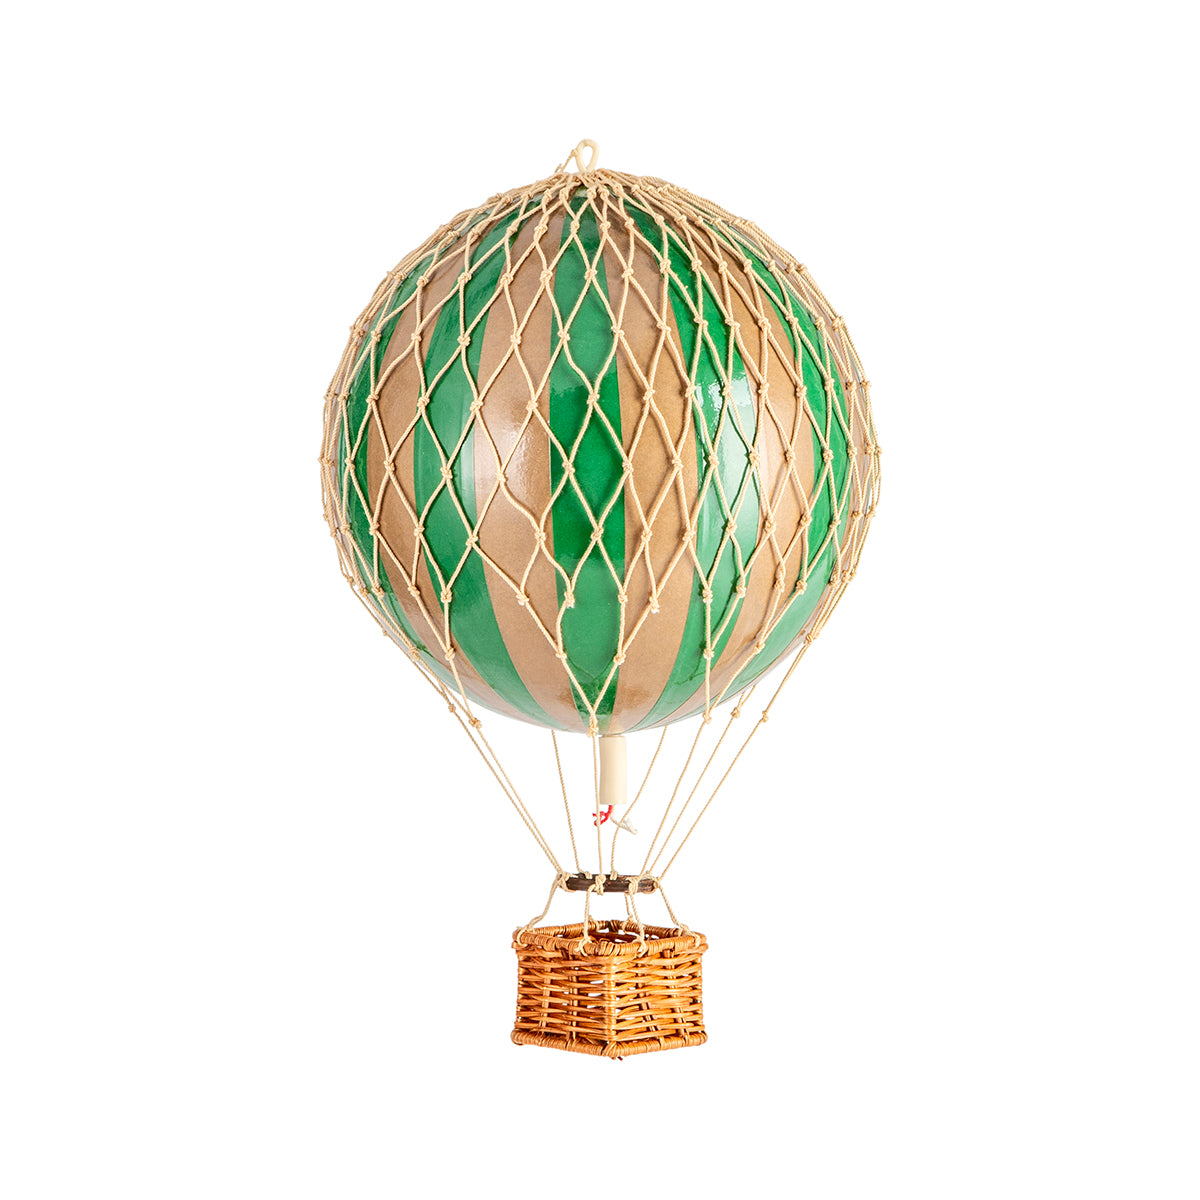 A quirky Wonderen Stroopwafels hot air balloon is floating against a white background, showcasing its vibrant green and brown colors.